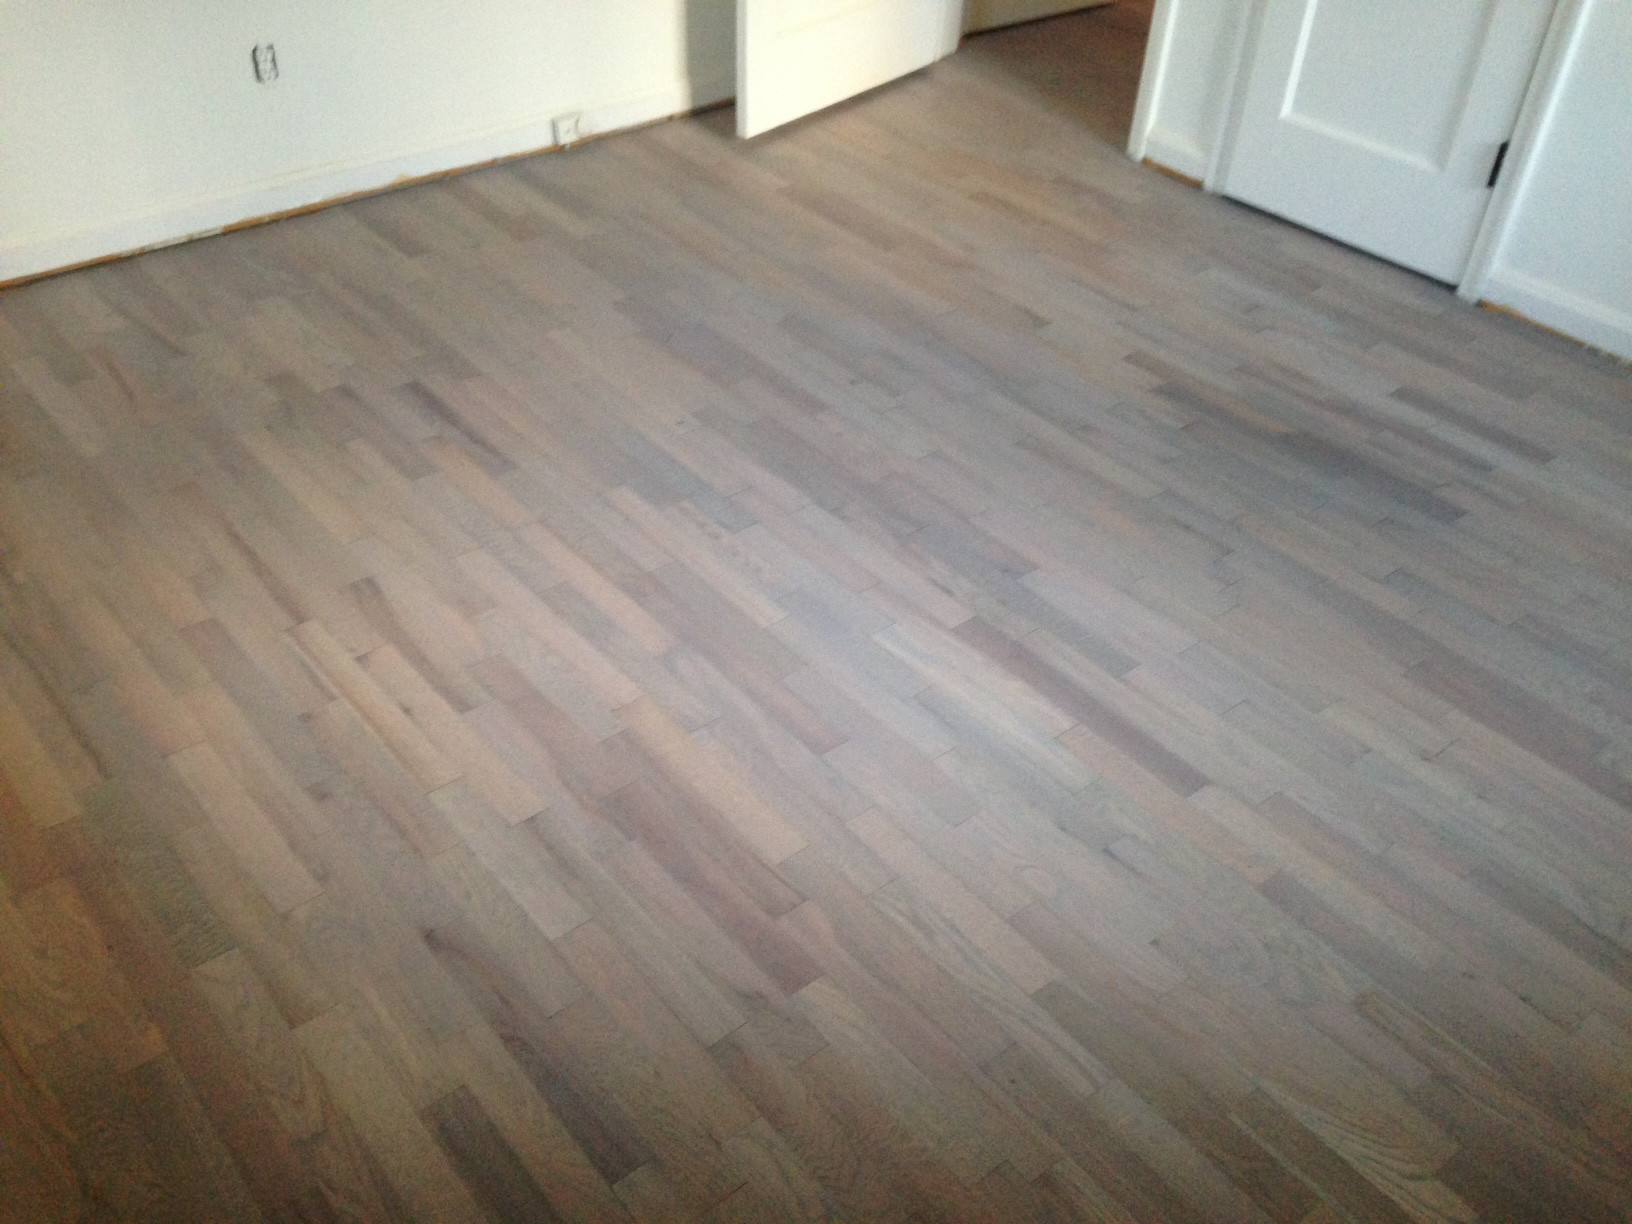 11 Stylish How Much Does Refinishing A Hardwood Floor Cost 2024 free download how much does refinishing a hardwood floor cost of refinishing wood floors for a beach house look dan39s white washed in refinishing wood floors for a beach house look dan39s red oak wood fl